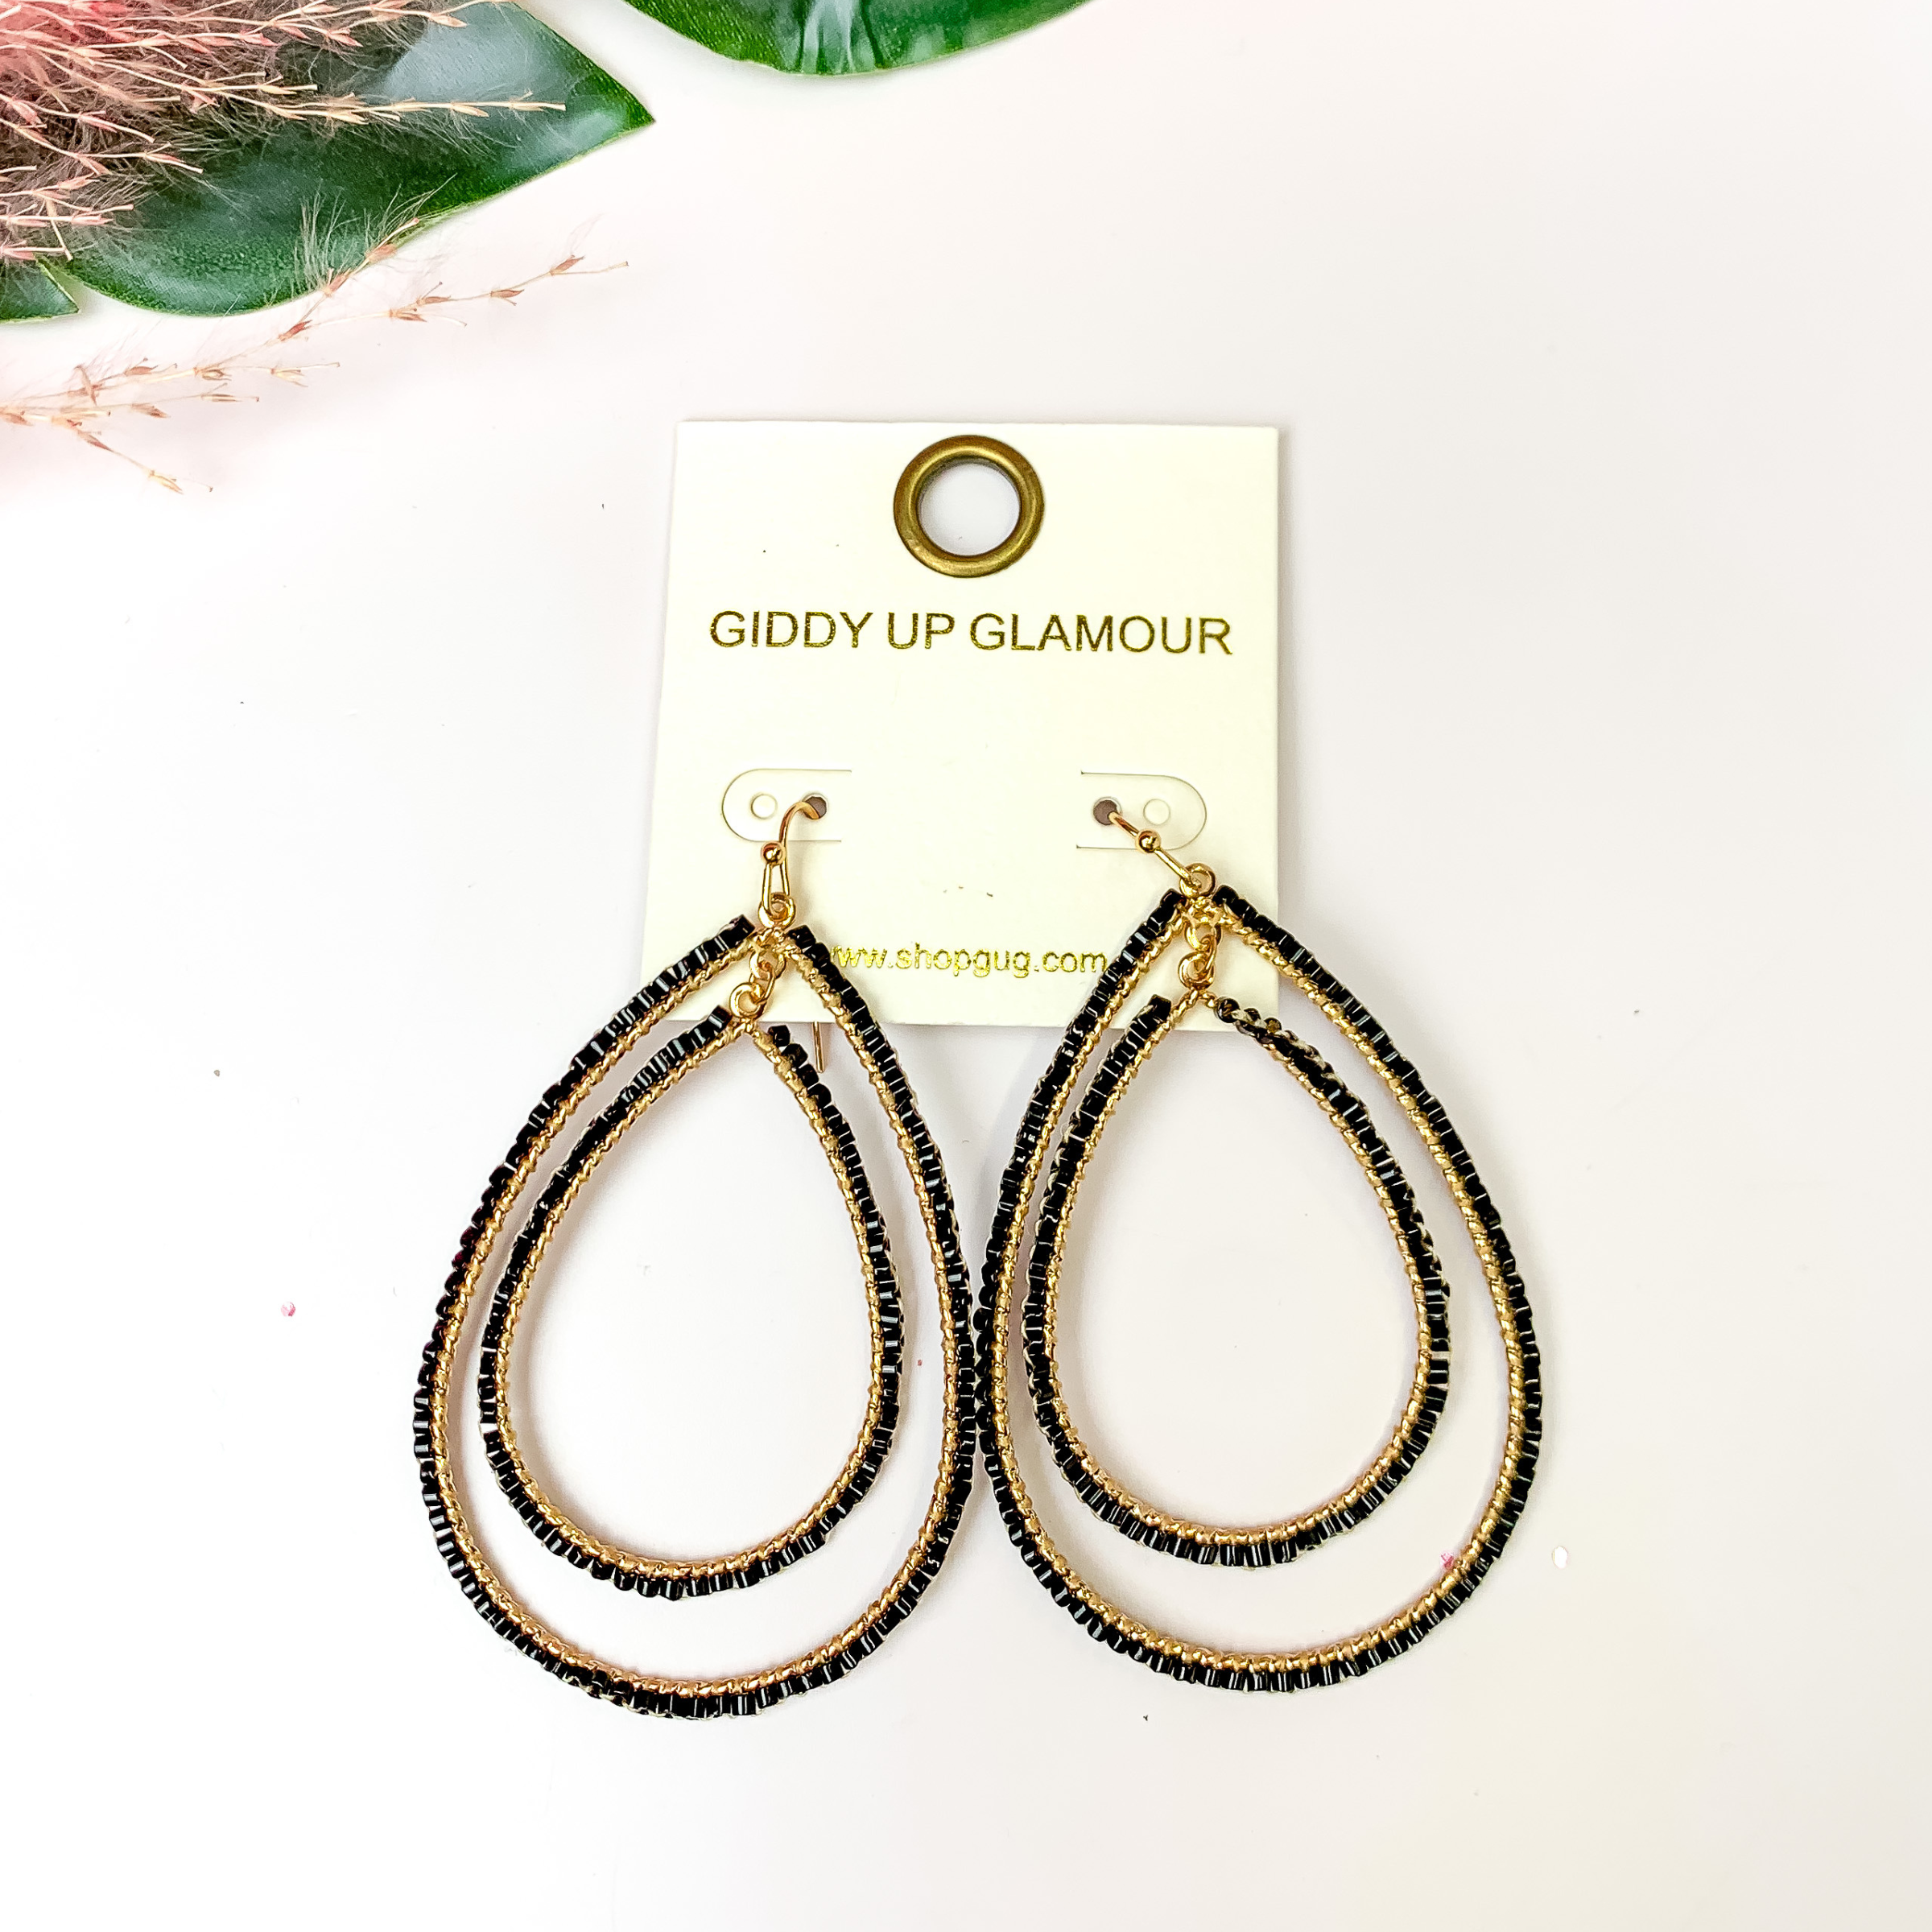 Double Open Teardrop Gold Tone Earrings with Beaded Outline in Black - Giddy Up Glamour Boutique